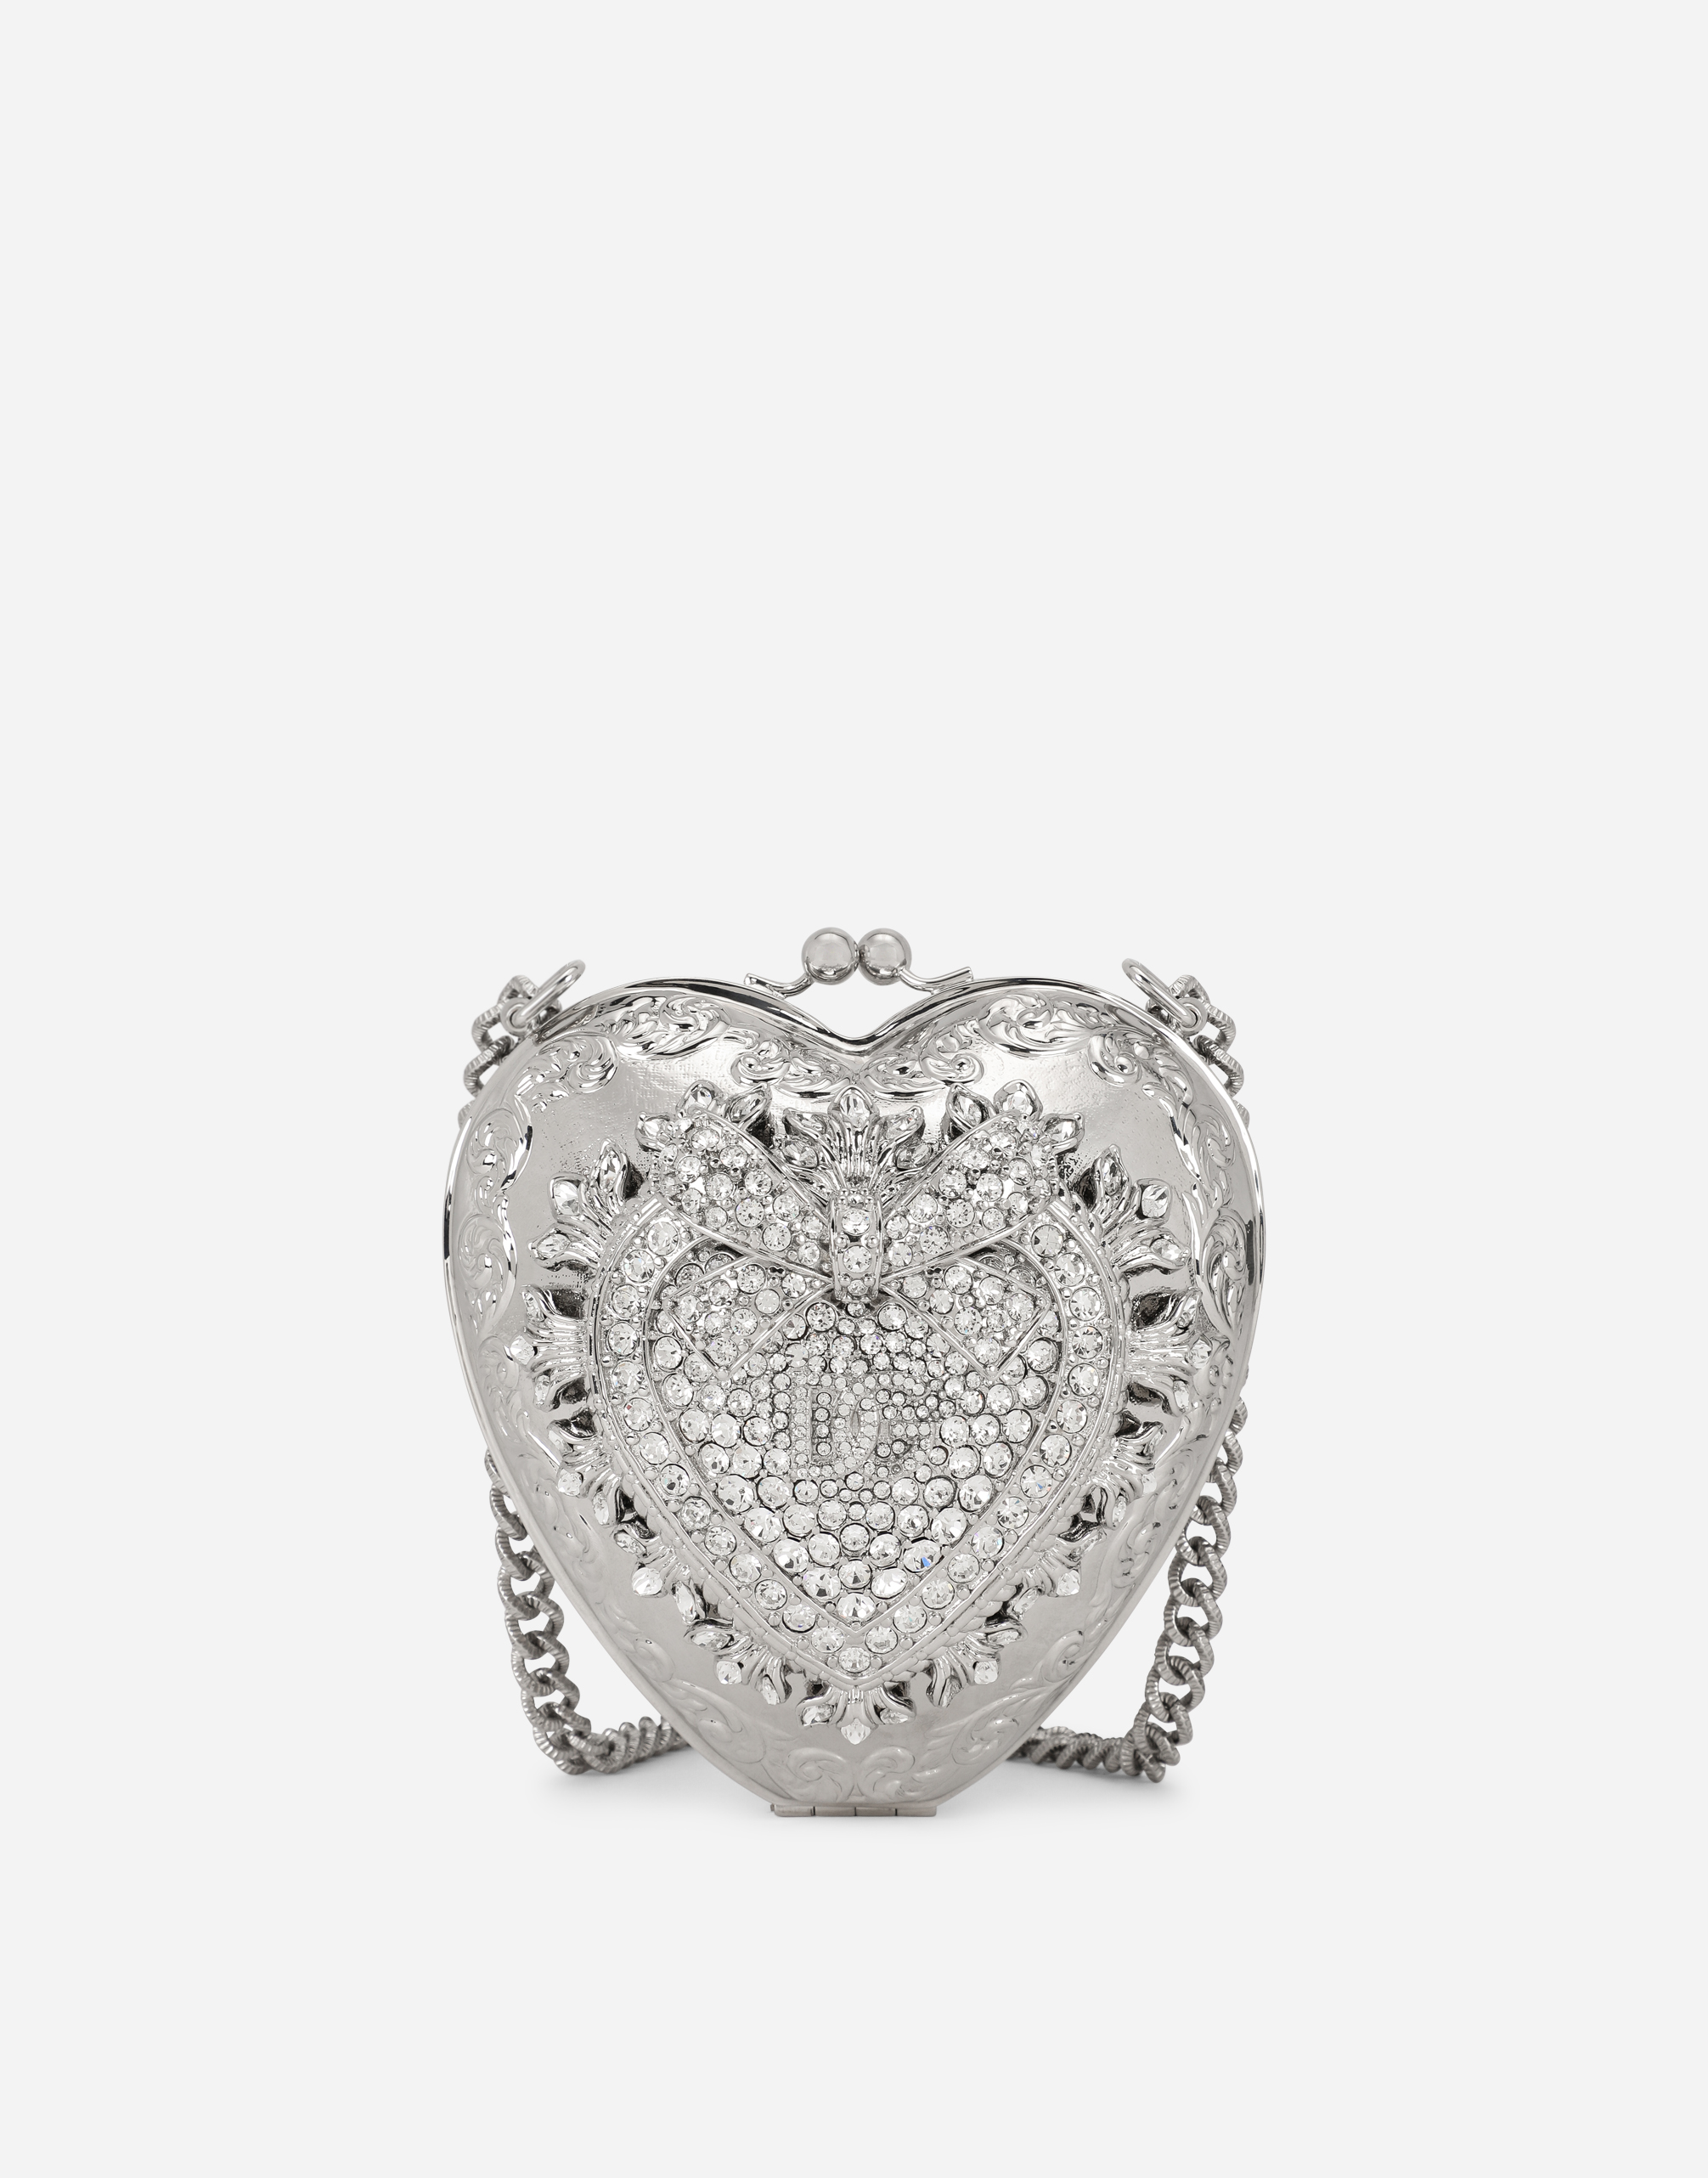 Metal Devotion heart bag with crystal embellishment in Silver